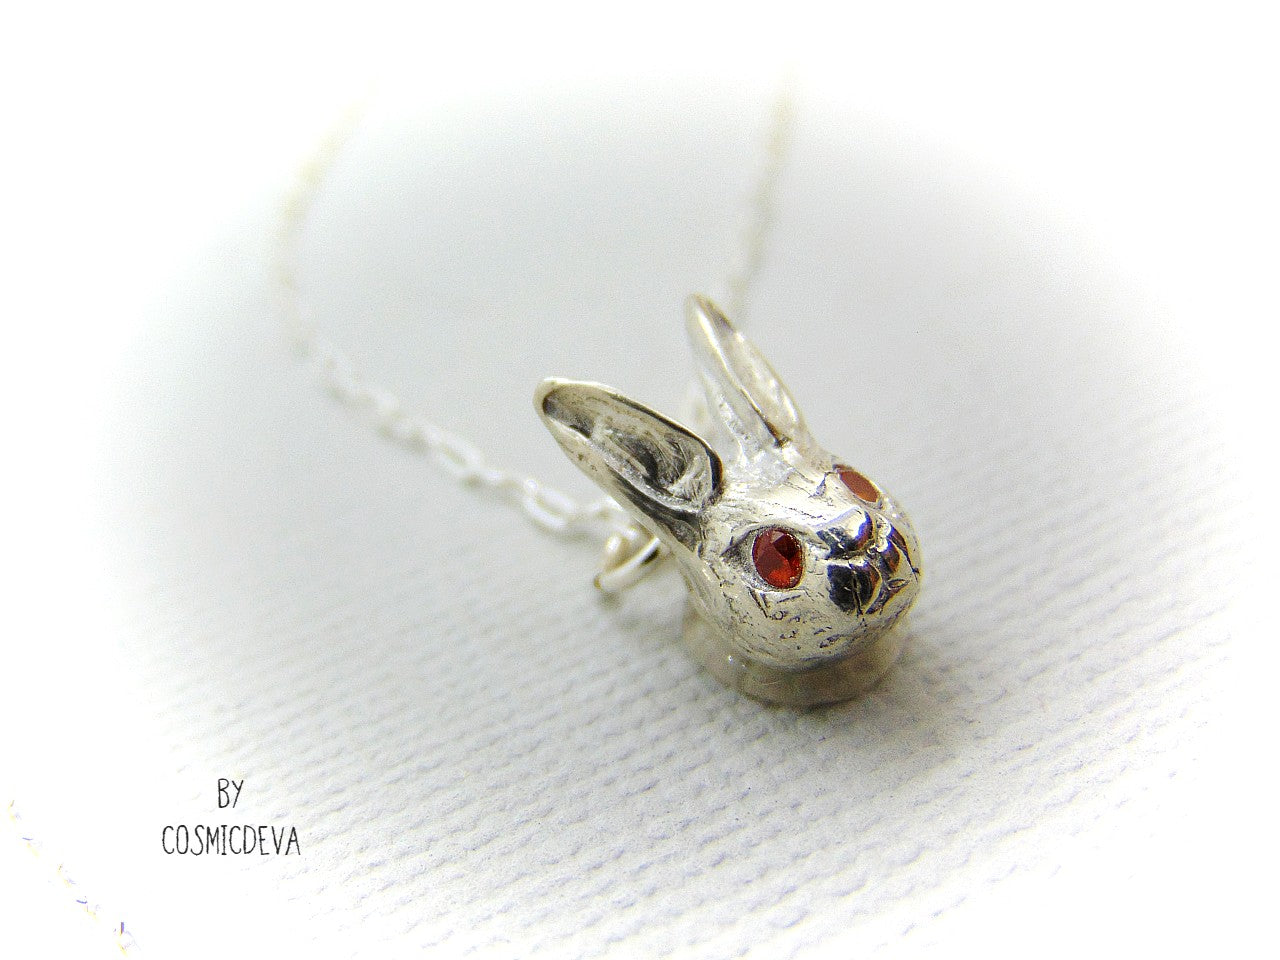 Handmade dainty small little rabbit 🐰 made of solid sterling silver with tiny faceted lab created fire opal eyes. Lab created stones are chemically, physically and optically identical to those mined underground. This cute little bunny dangles from a delicate 18 inch solid .925 sterling silver flat cable 1.4mm chain necklace.